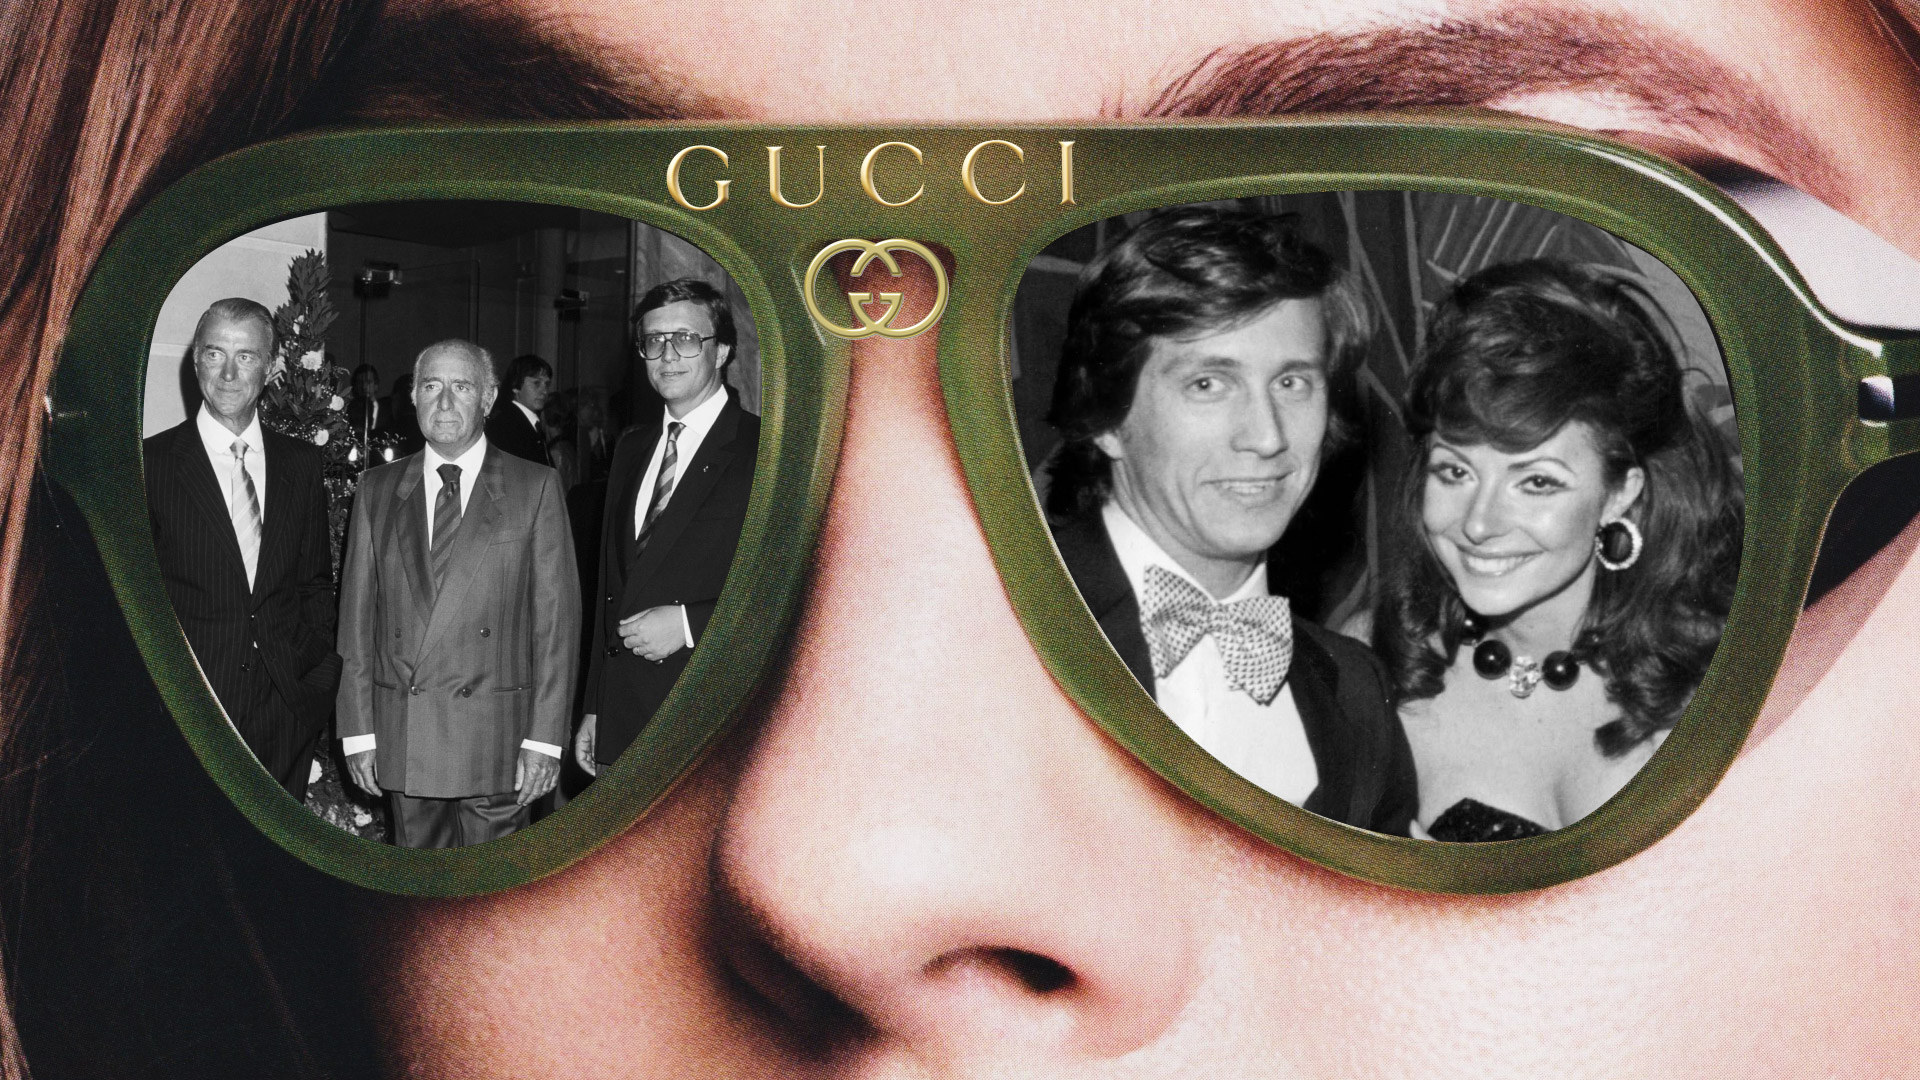 House of Gucci vs the true story of the wealthy Gucci family – what